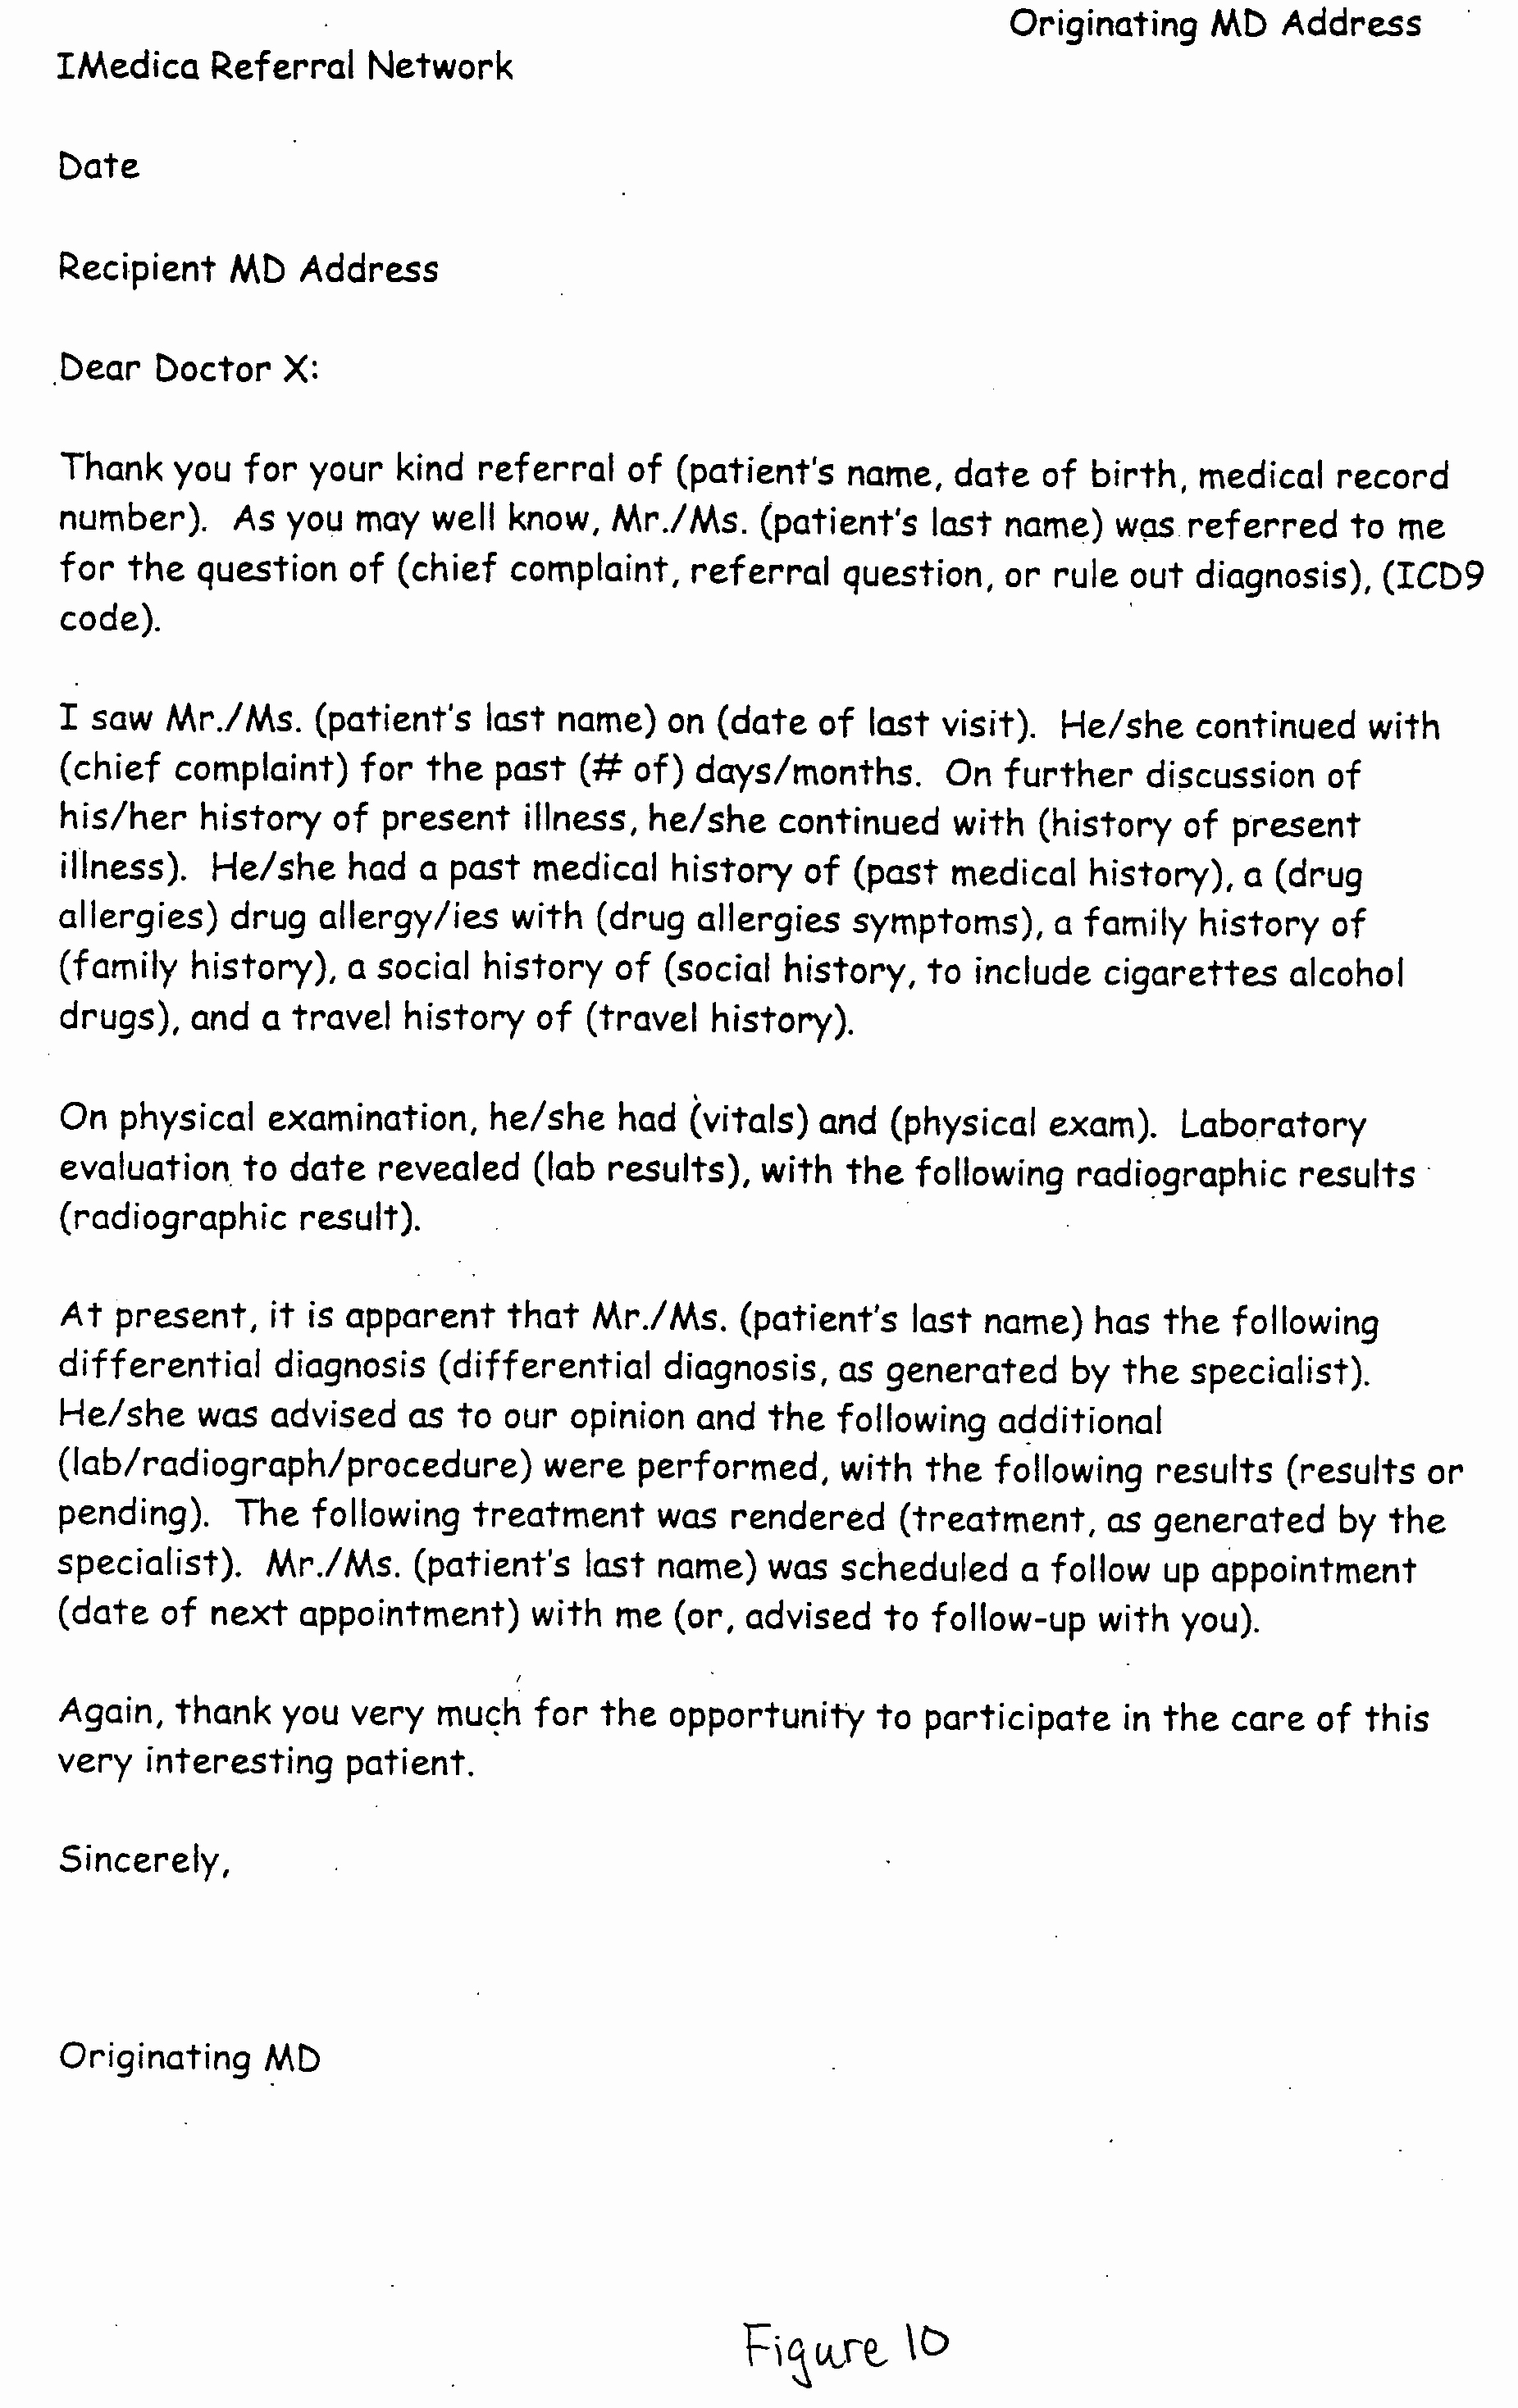 Medical Referral Letter Template Elegant Patent Us Patient Referral and Physician to